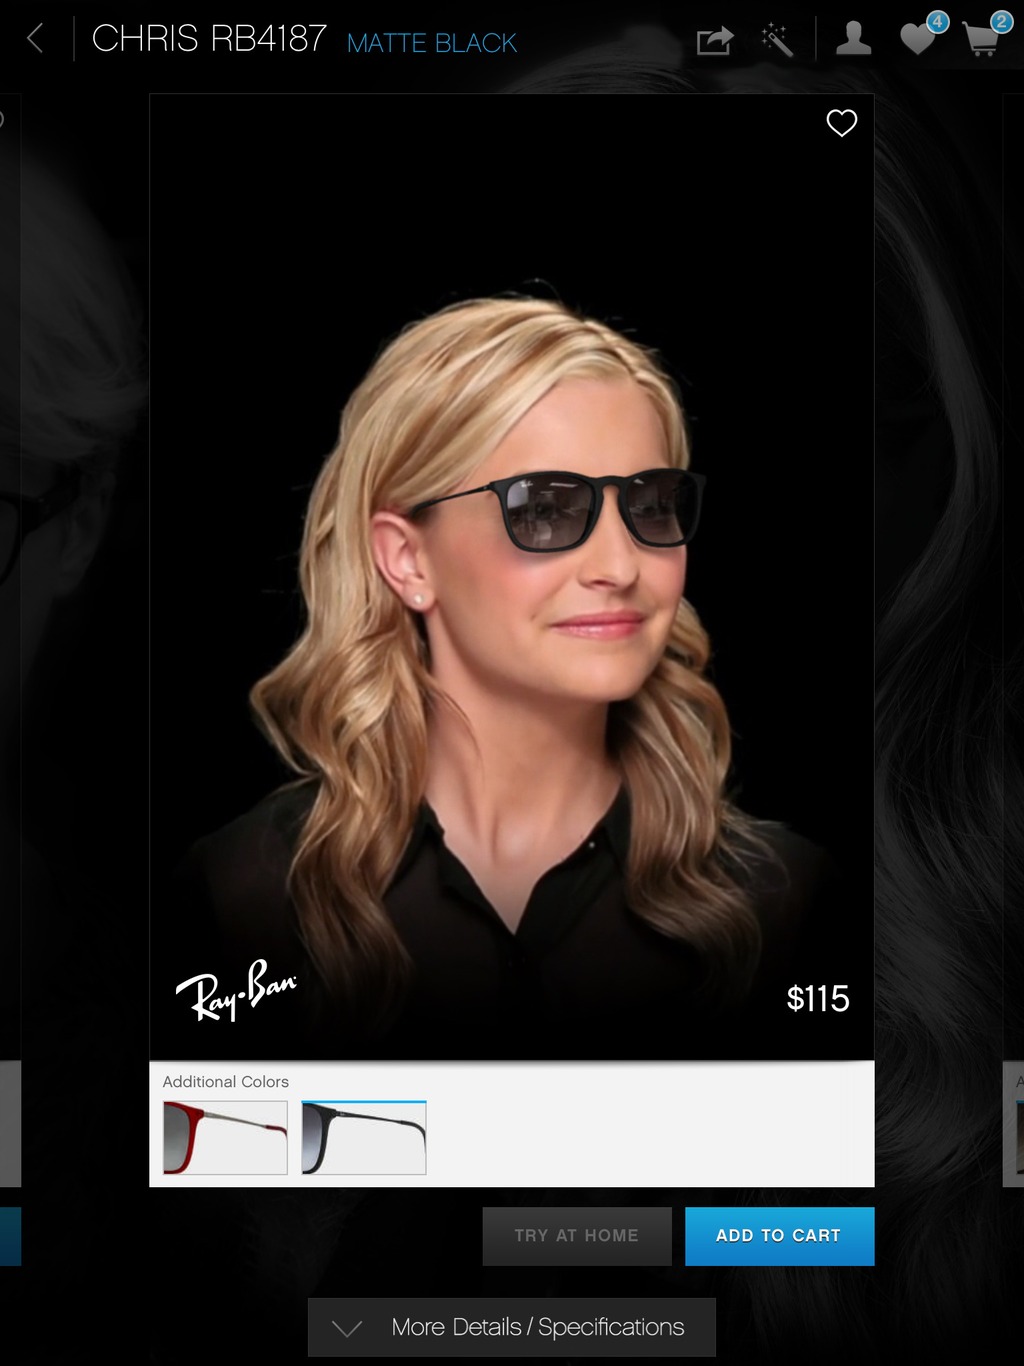 CSIRO’s Smart Vision technology used as a component of Glasses.com’s purchasing app. Image: glasses.com